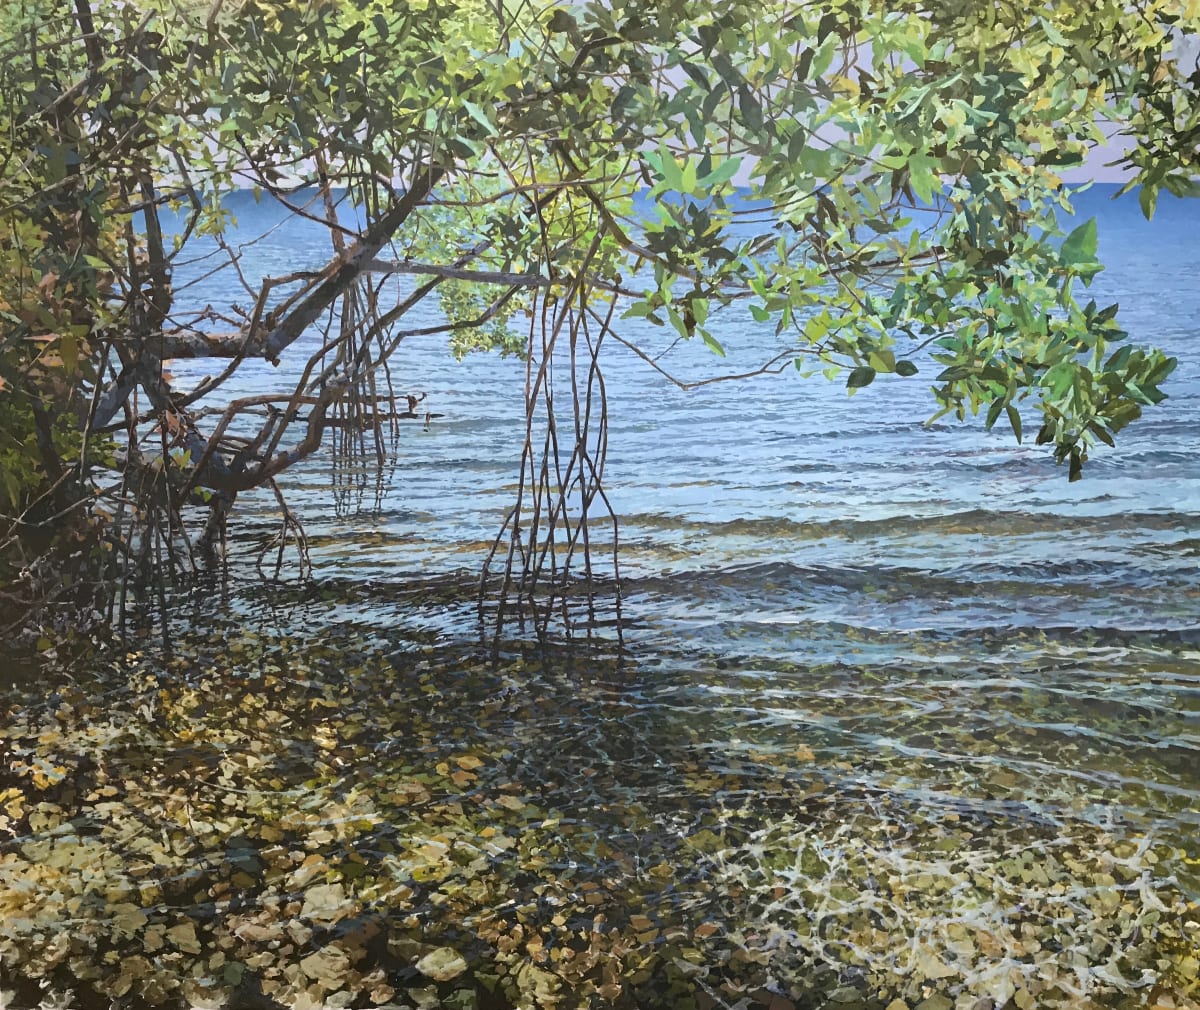 Mangrove Shadow by Bruce Marsh  Image: The edge of Tampa Bay.